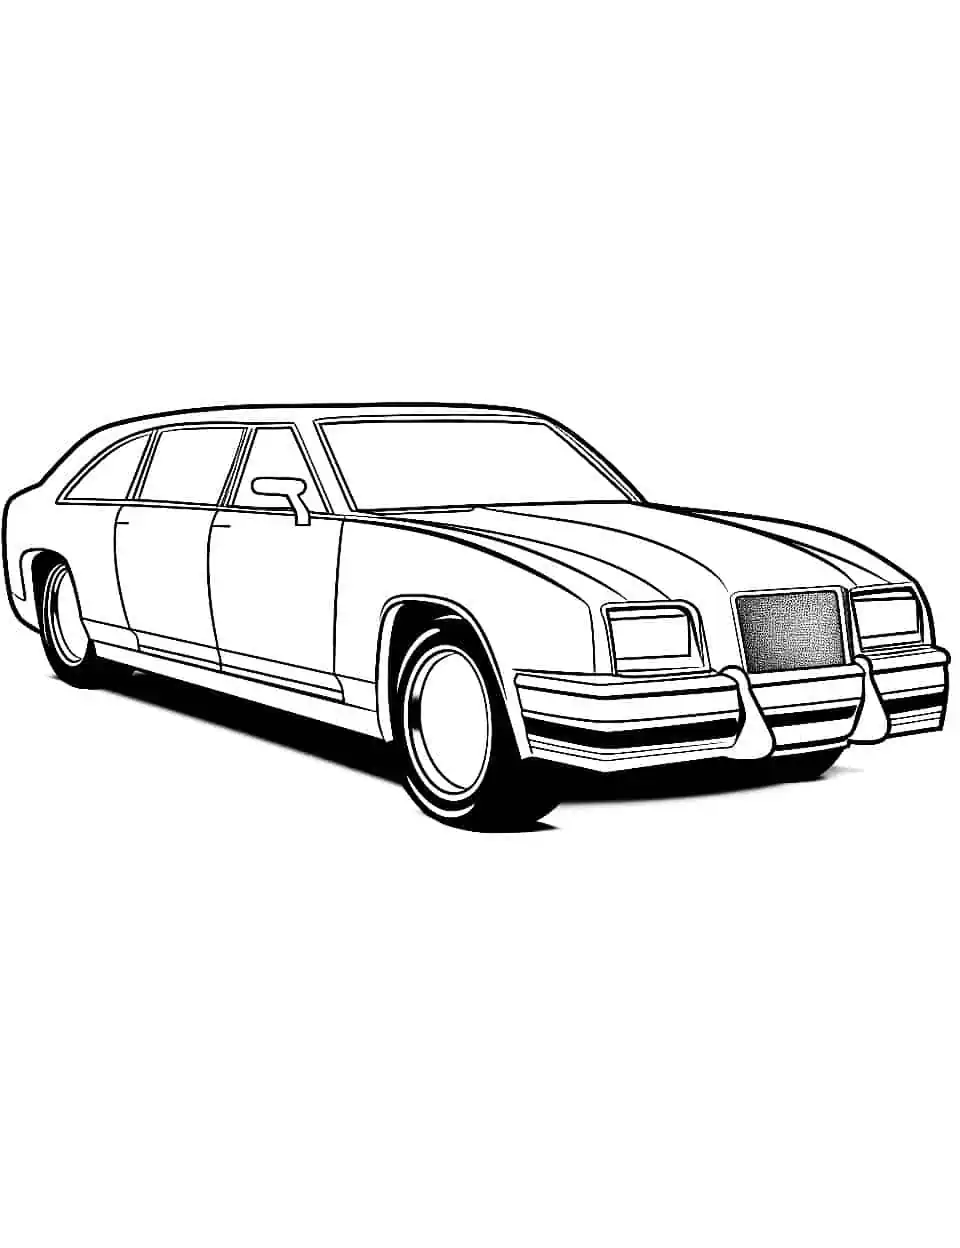 Limousine Luxury Car Coloring Page - A long and luxurious limousine waiting to be colored.